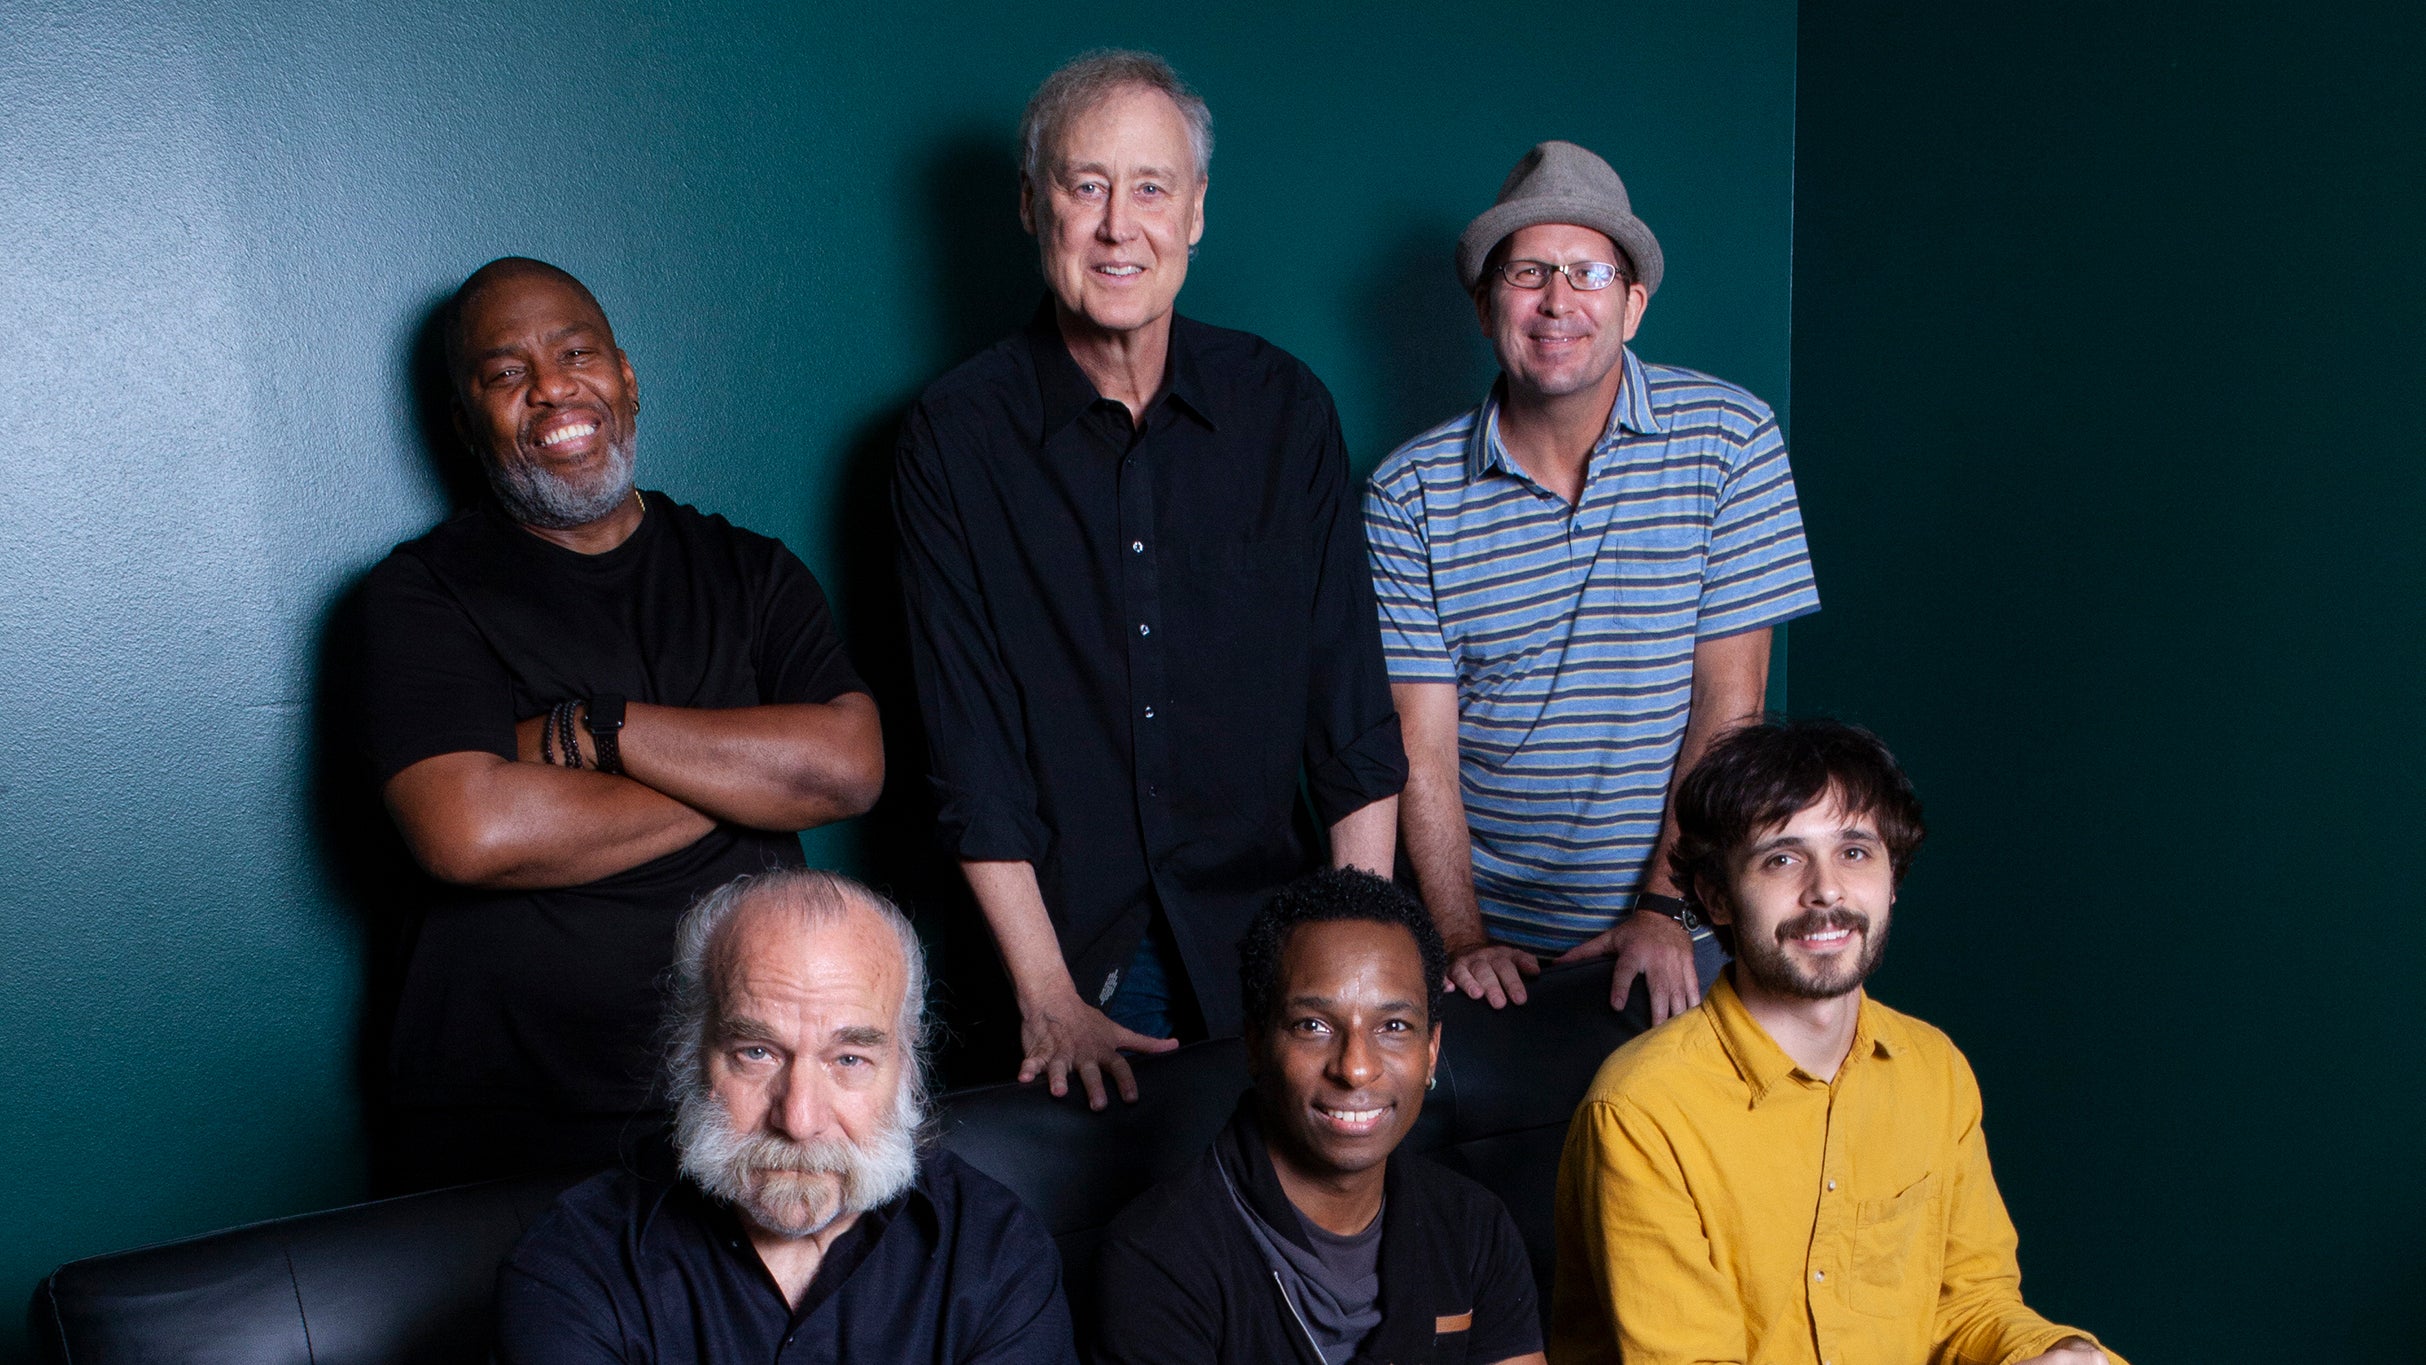 Bruce Hornsby & the Noisemakers at Pepsi Amphitheater